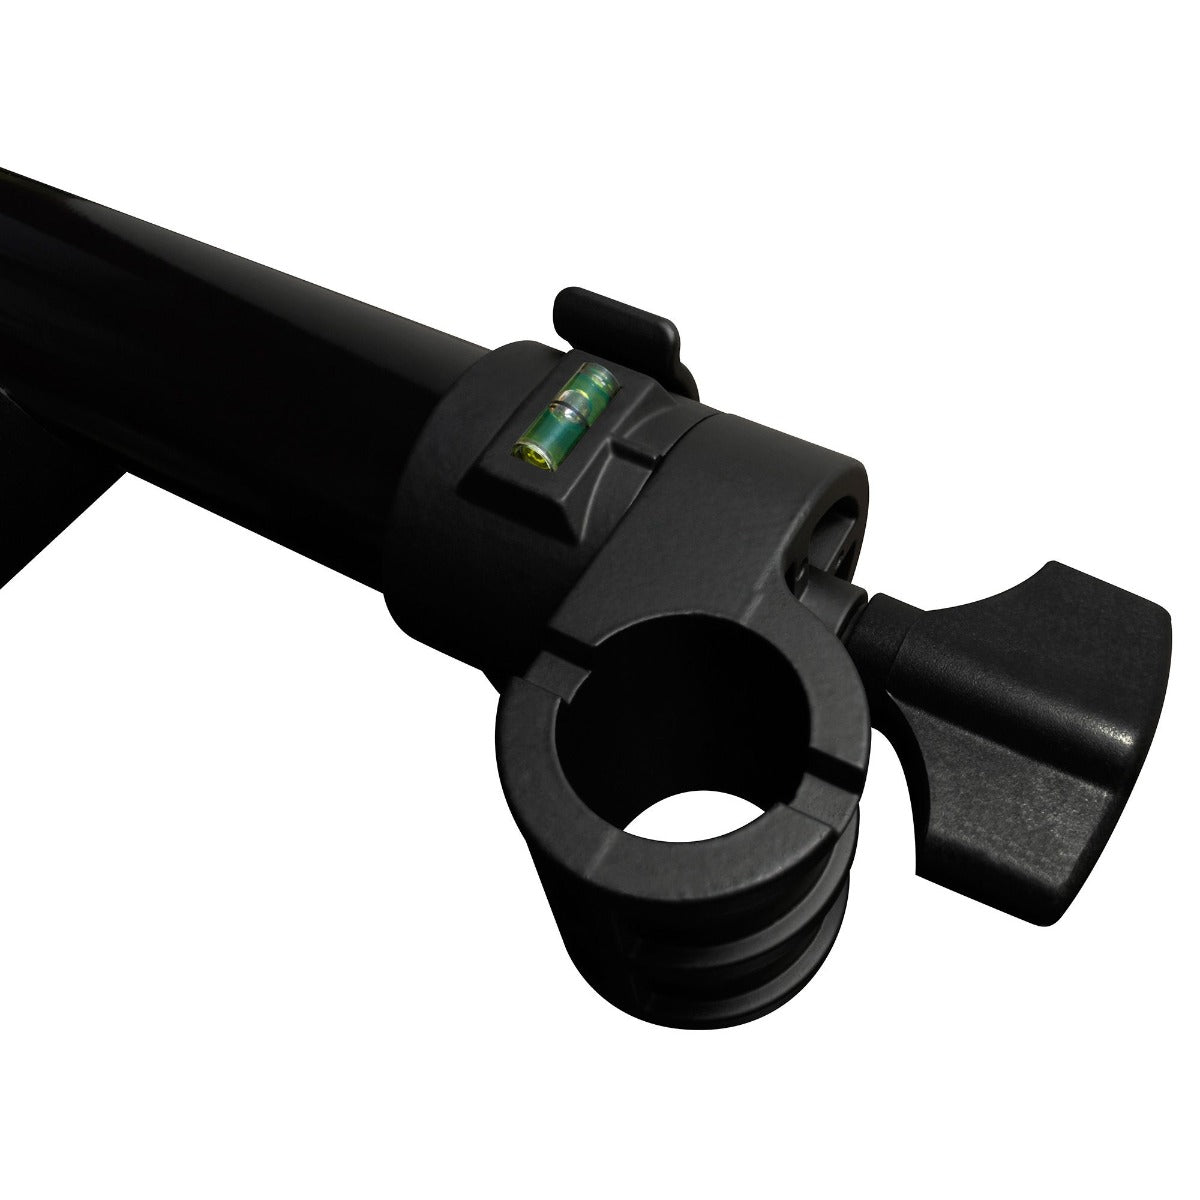 Socket clamp of the Ultimate Support VSIQ-200B Second Tier